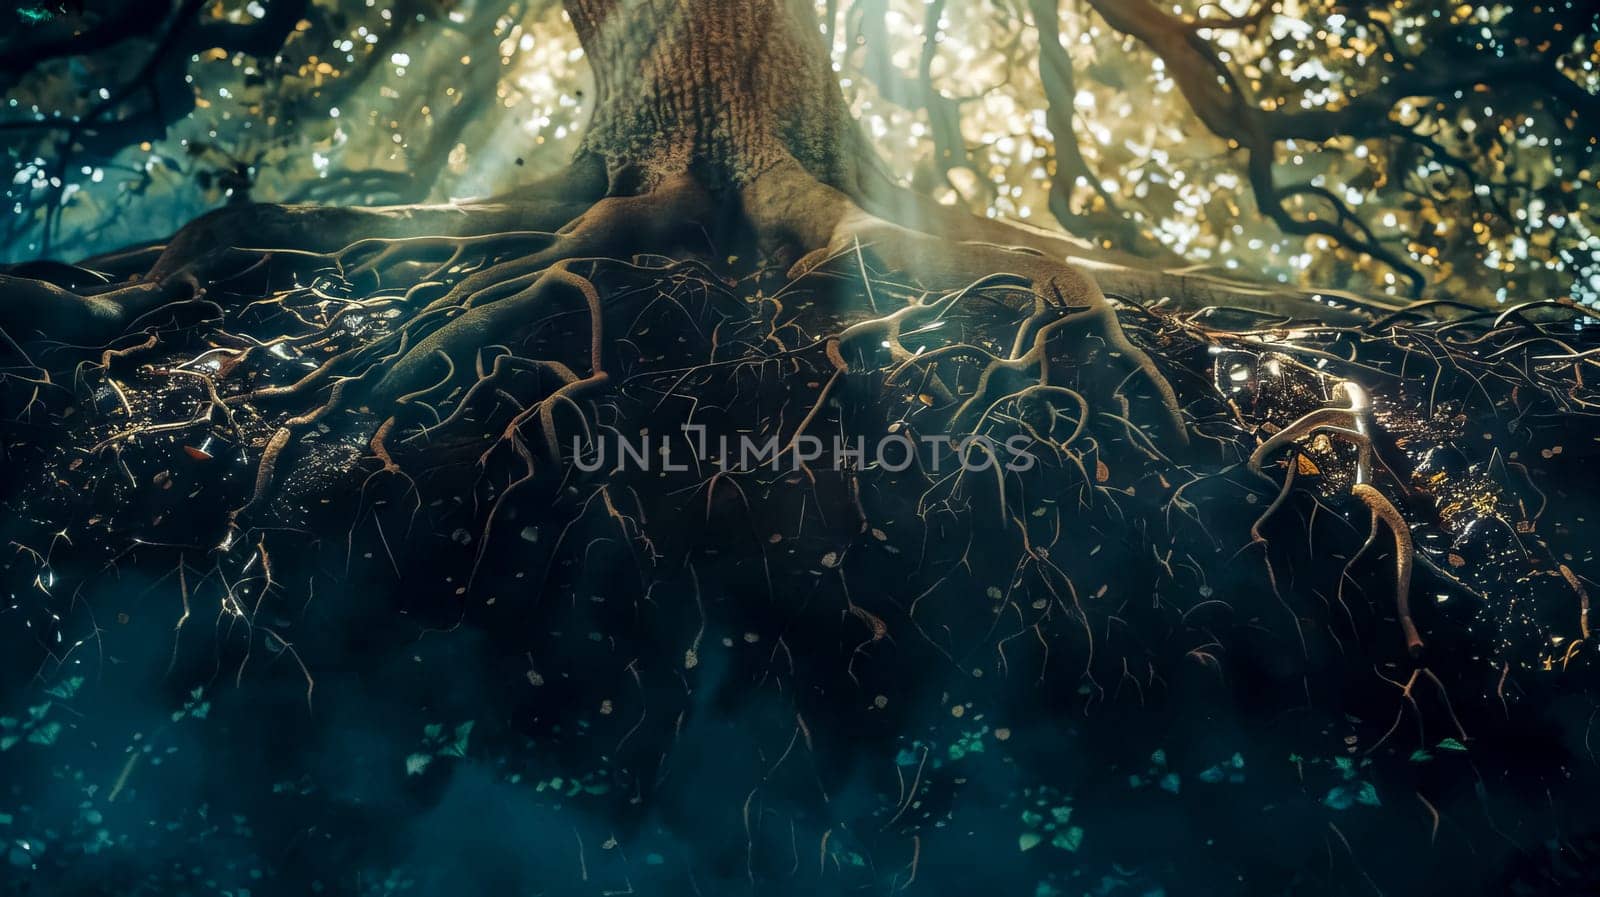 Magical scene of glowing roots and shimmering leaves in a mystical forest